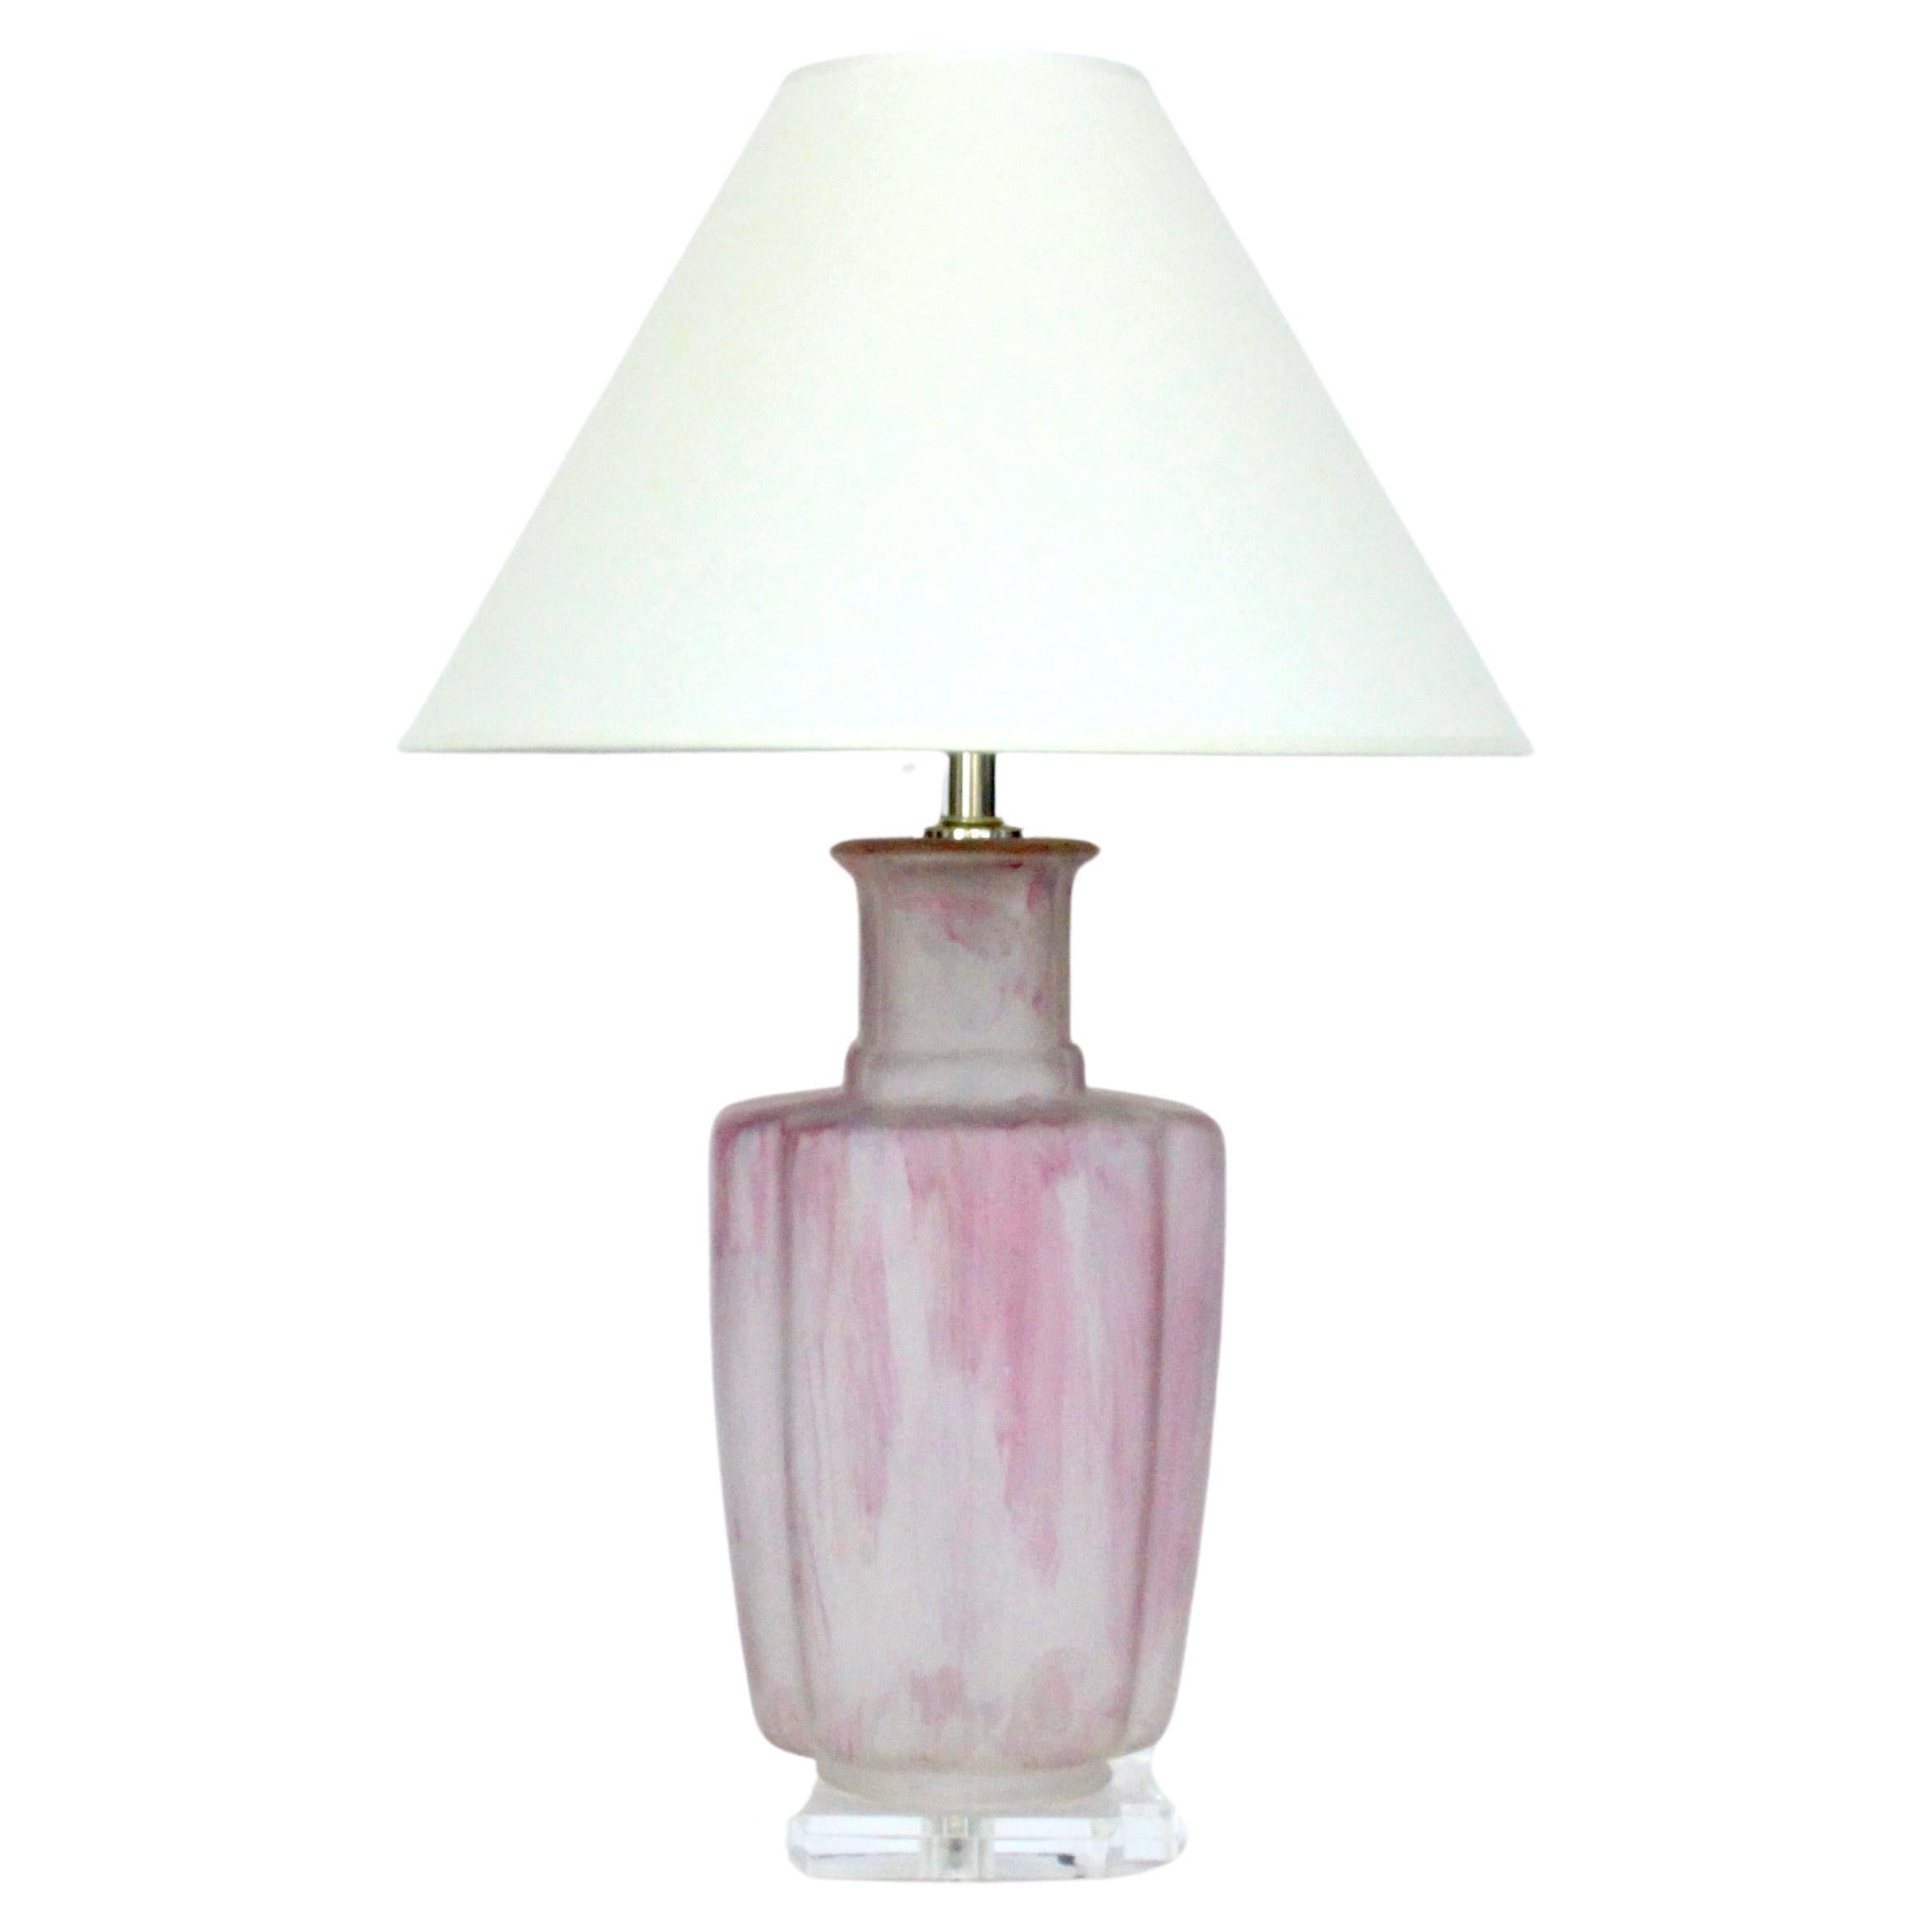 Bauer Lamp Company Mottled Frosted Pink "Clearlite" Glass Table Lamp, 1970's For Sale